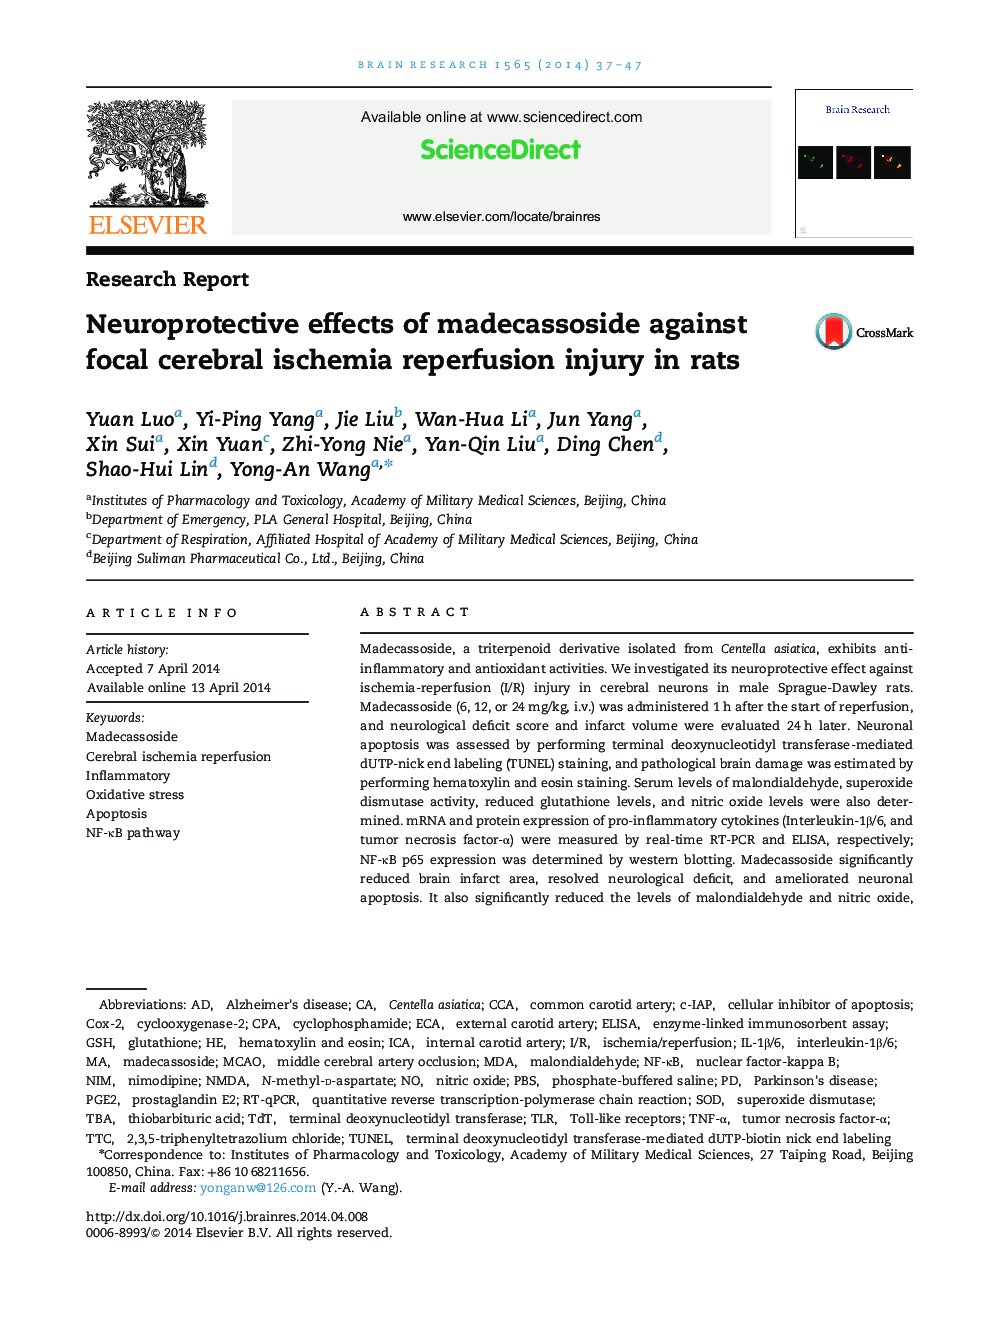 Neuroprotective effects of madecassoside against focal cerebral ischemia reperfusion injury in rats